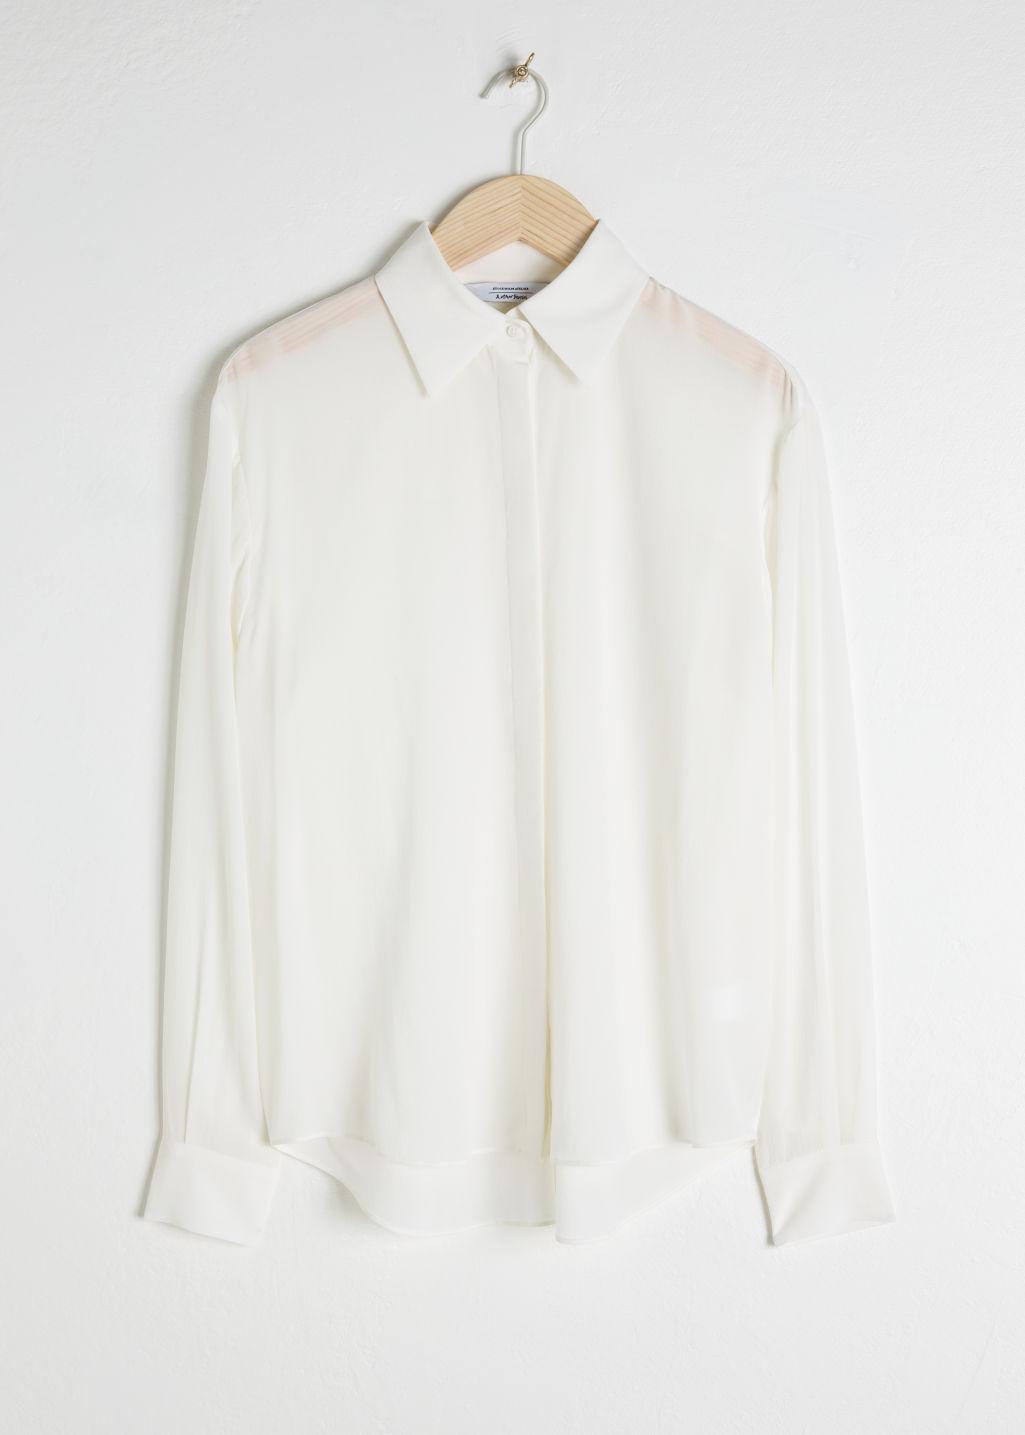 & Other Stories Pointed Collar Silk Shirt in White - Lyst